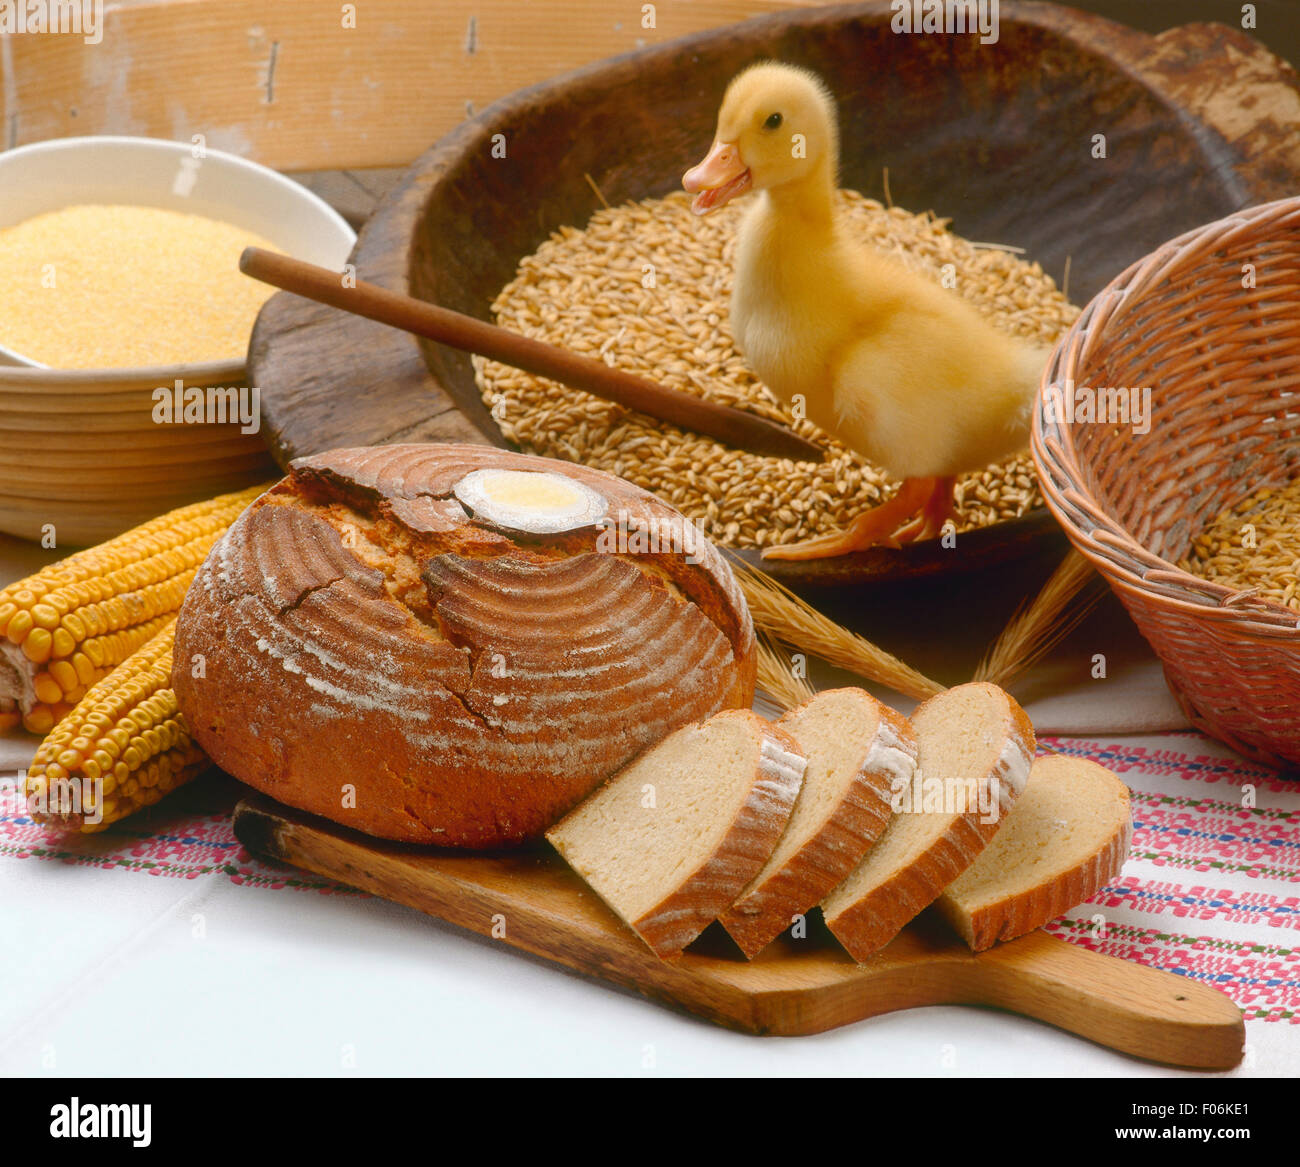 Multigrain bread with ingredients and little duck Stock Photo